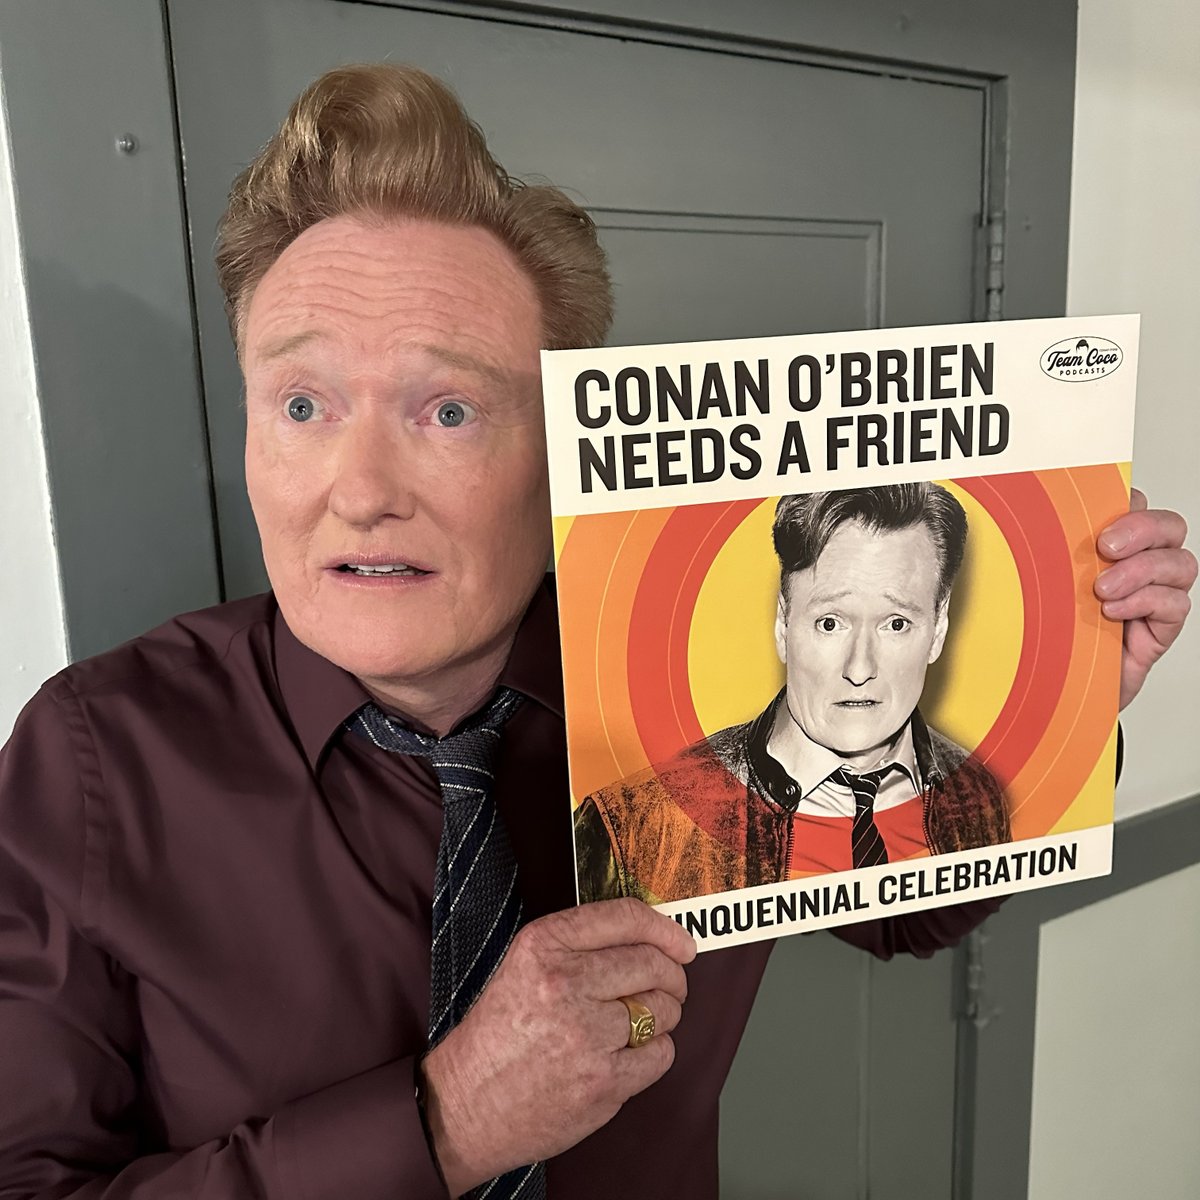 Attention future attic boxes: We’re releasing a 2nd pressing of the 'Conan O’Brien Needs a Friend: Quinquennial Celebration' vinyl. Limited to 5k copies, and now in orange. Get yours here: bit.ly/4dulsXT